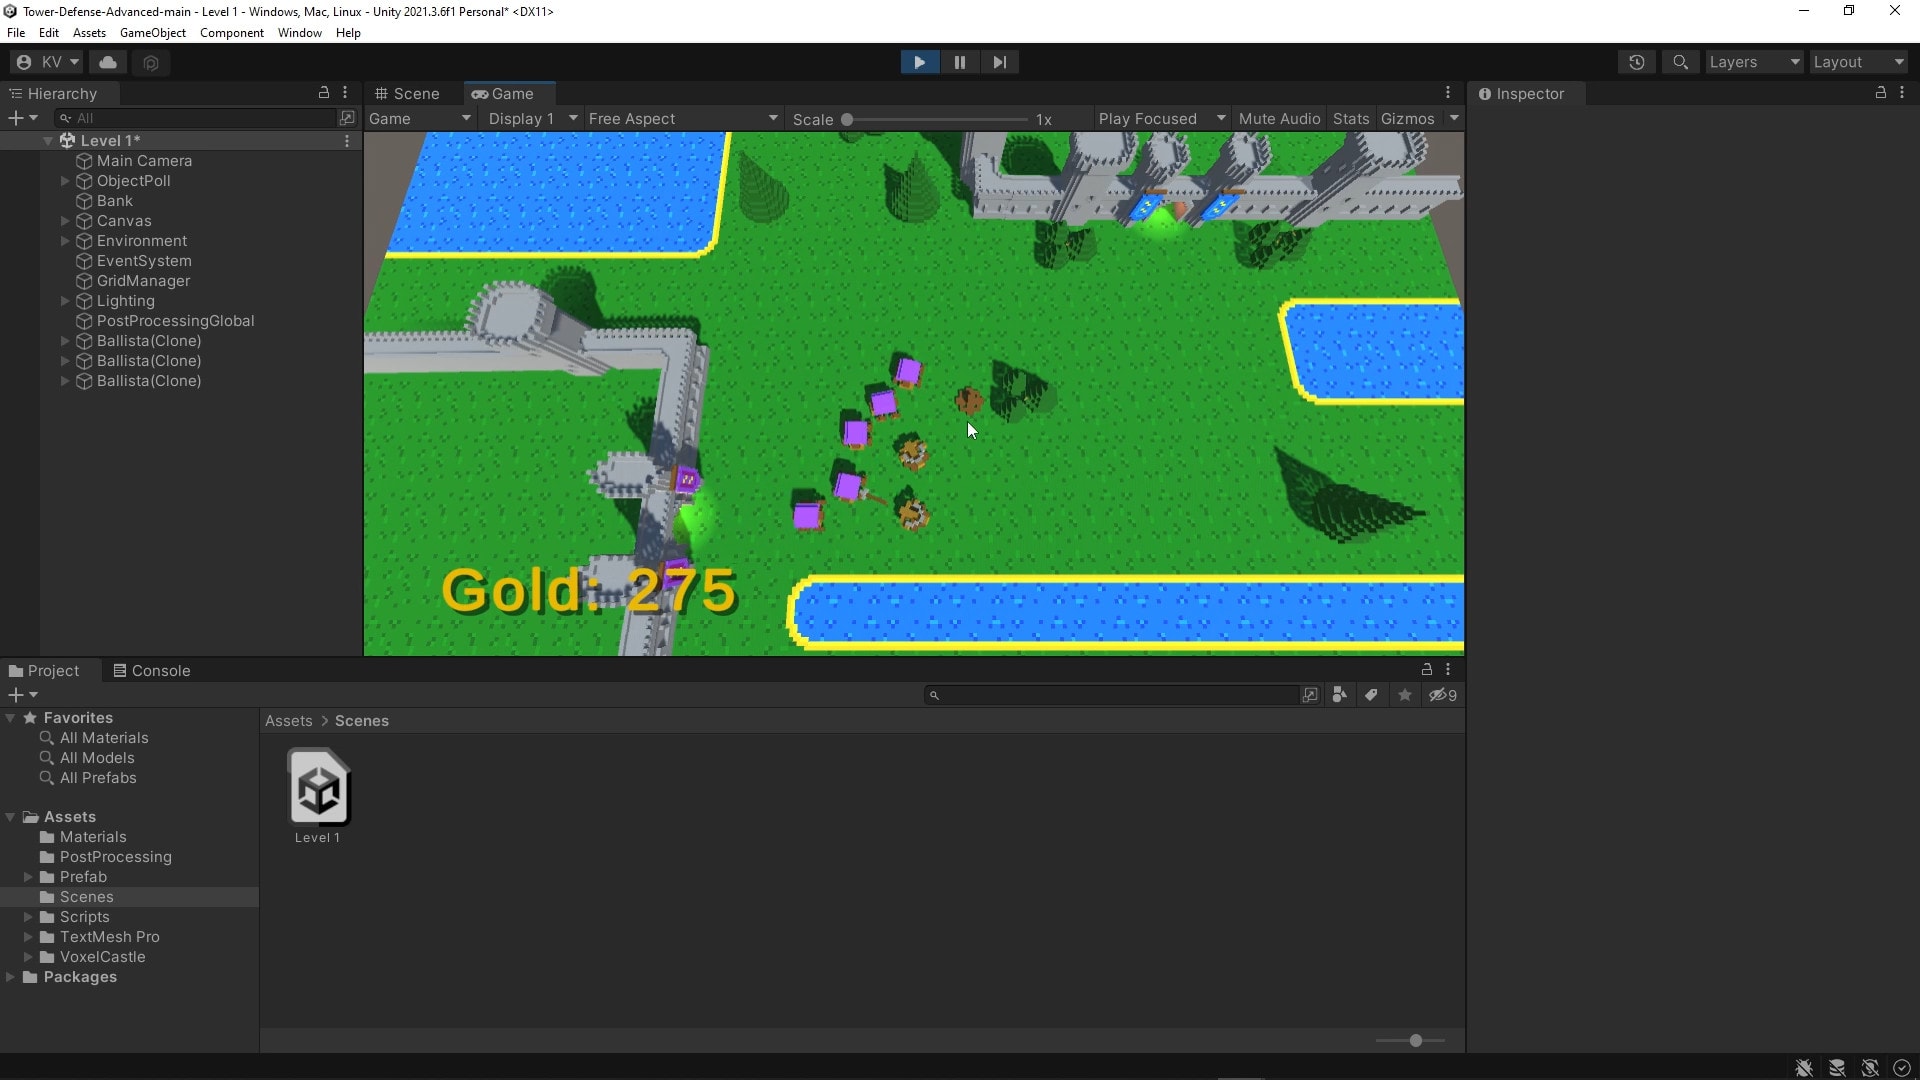 GitHub - Rion5/2D-TowerDefense: Tower Defense Game Created in C# with Unity  Game Engine